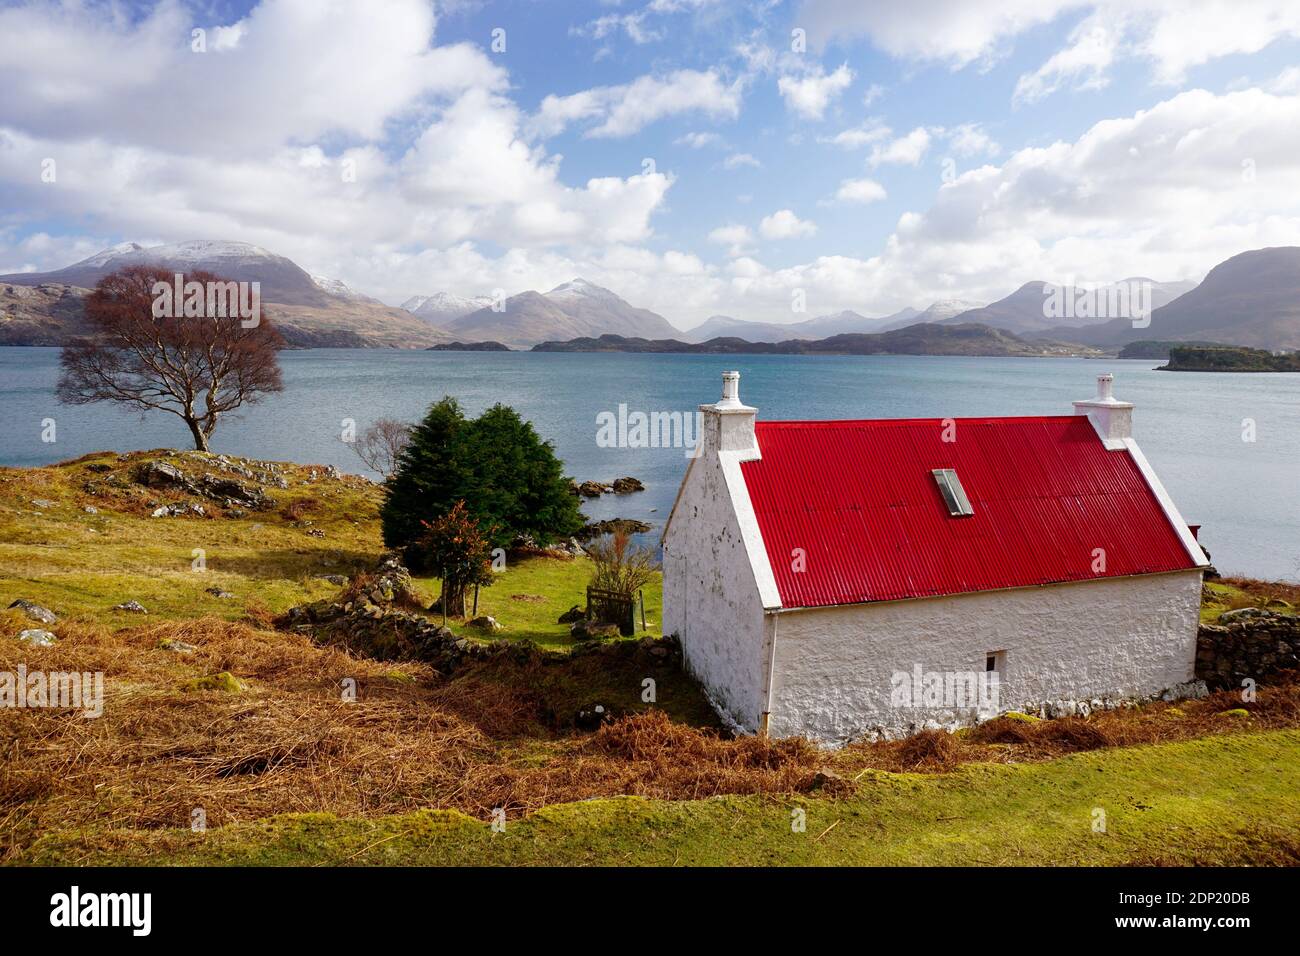 Red Roof Cottage (Scozia) Foto Stock